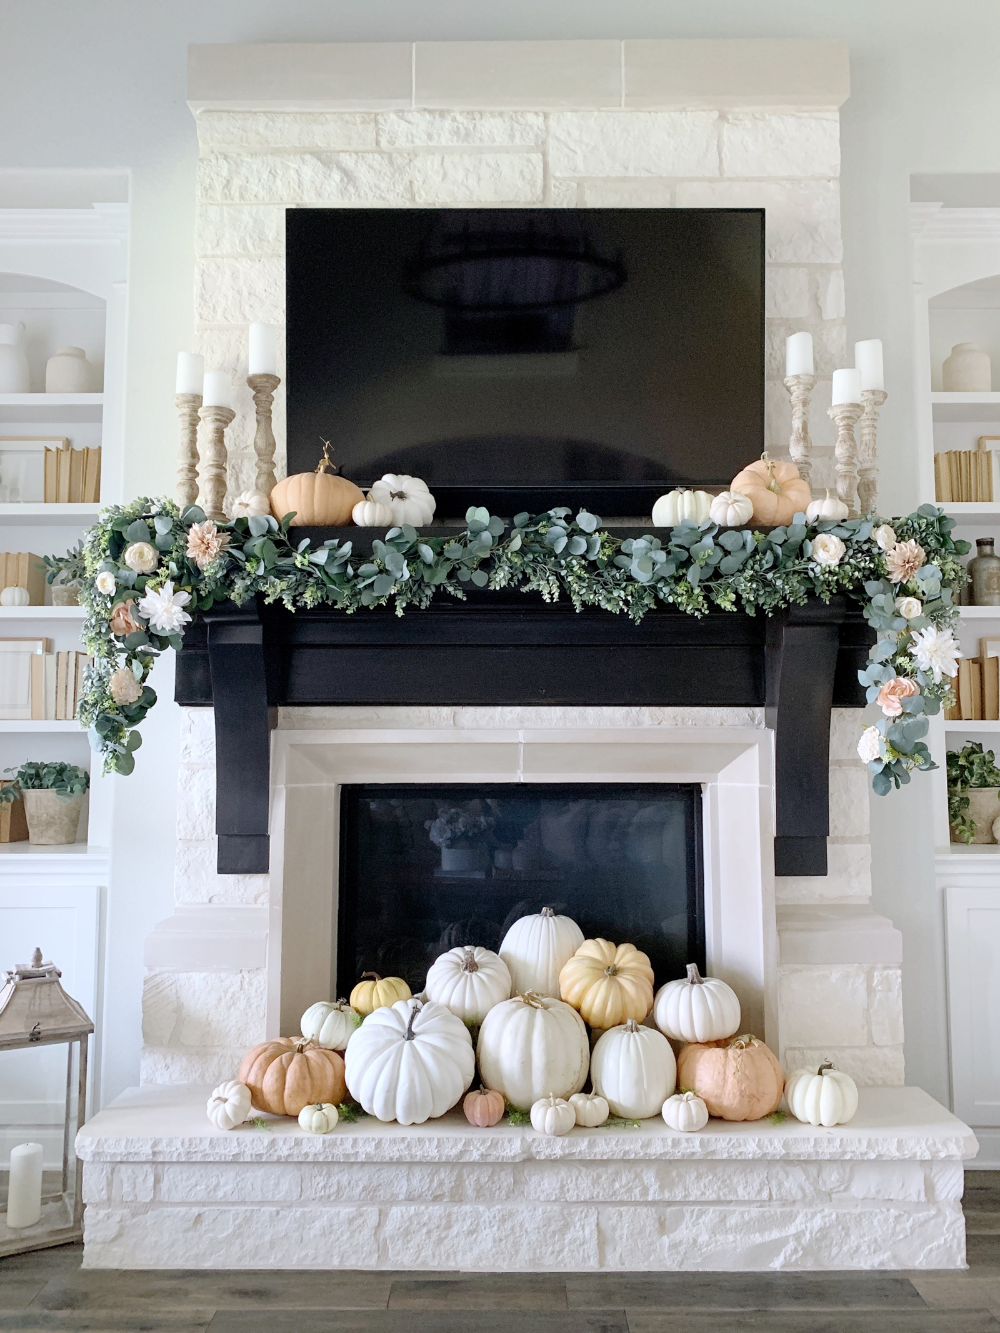 18 thanksgiving decorations for home living rooms ideas